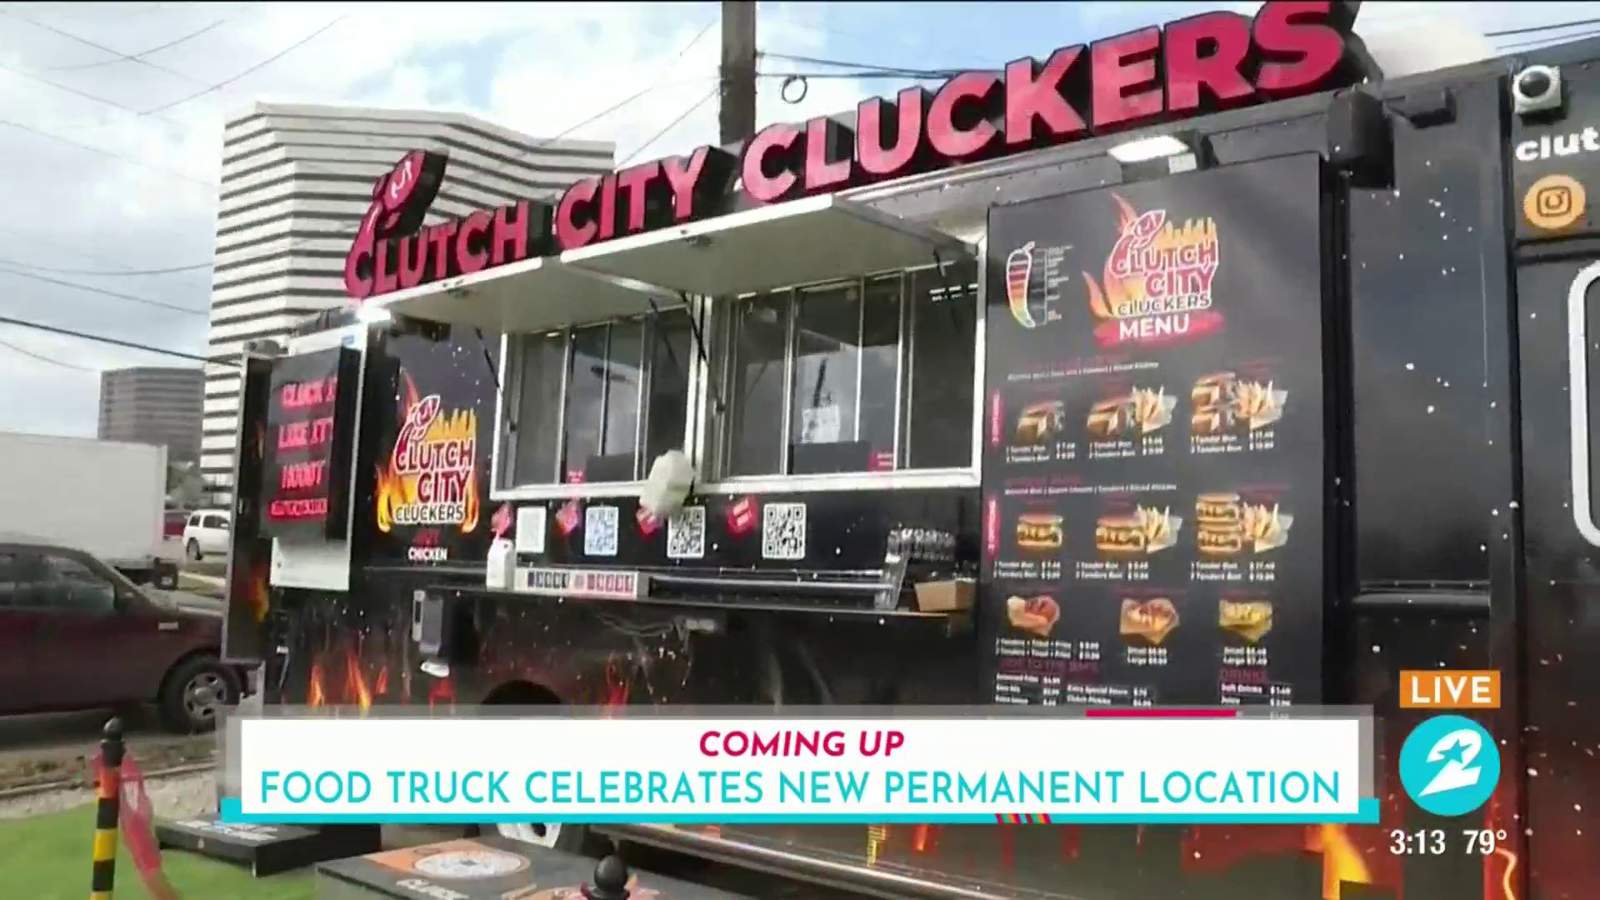 Clutch City Cluckers food truck celebrates permanent location with grand opening event